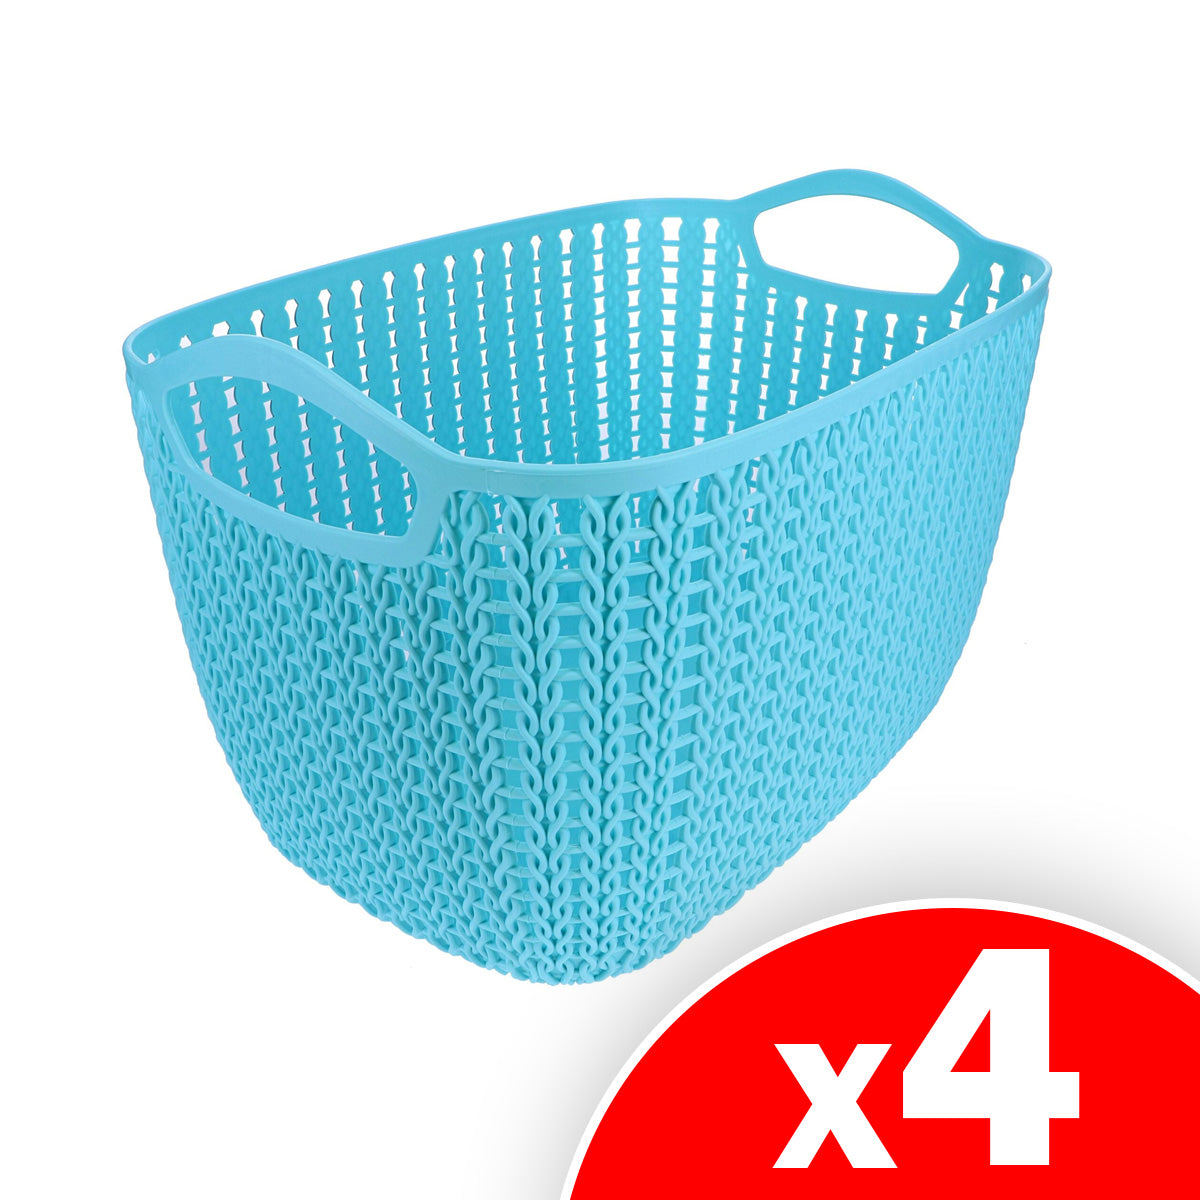 Mainstays Large Nesting Basket, Assorted Teal & White, 4 Pack